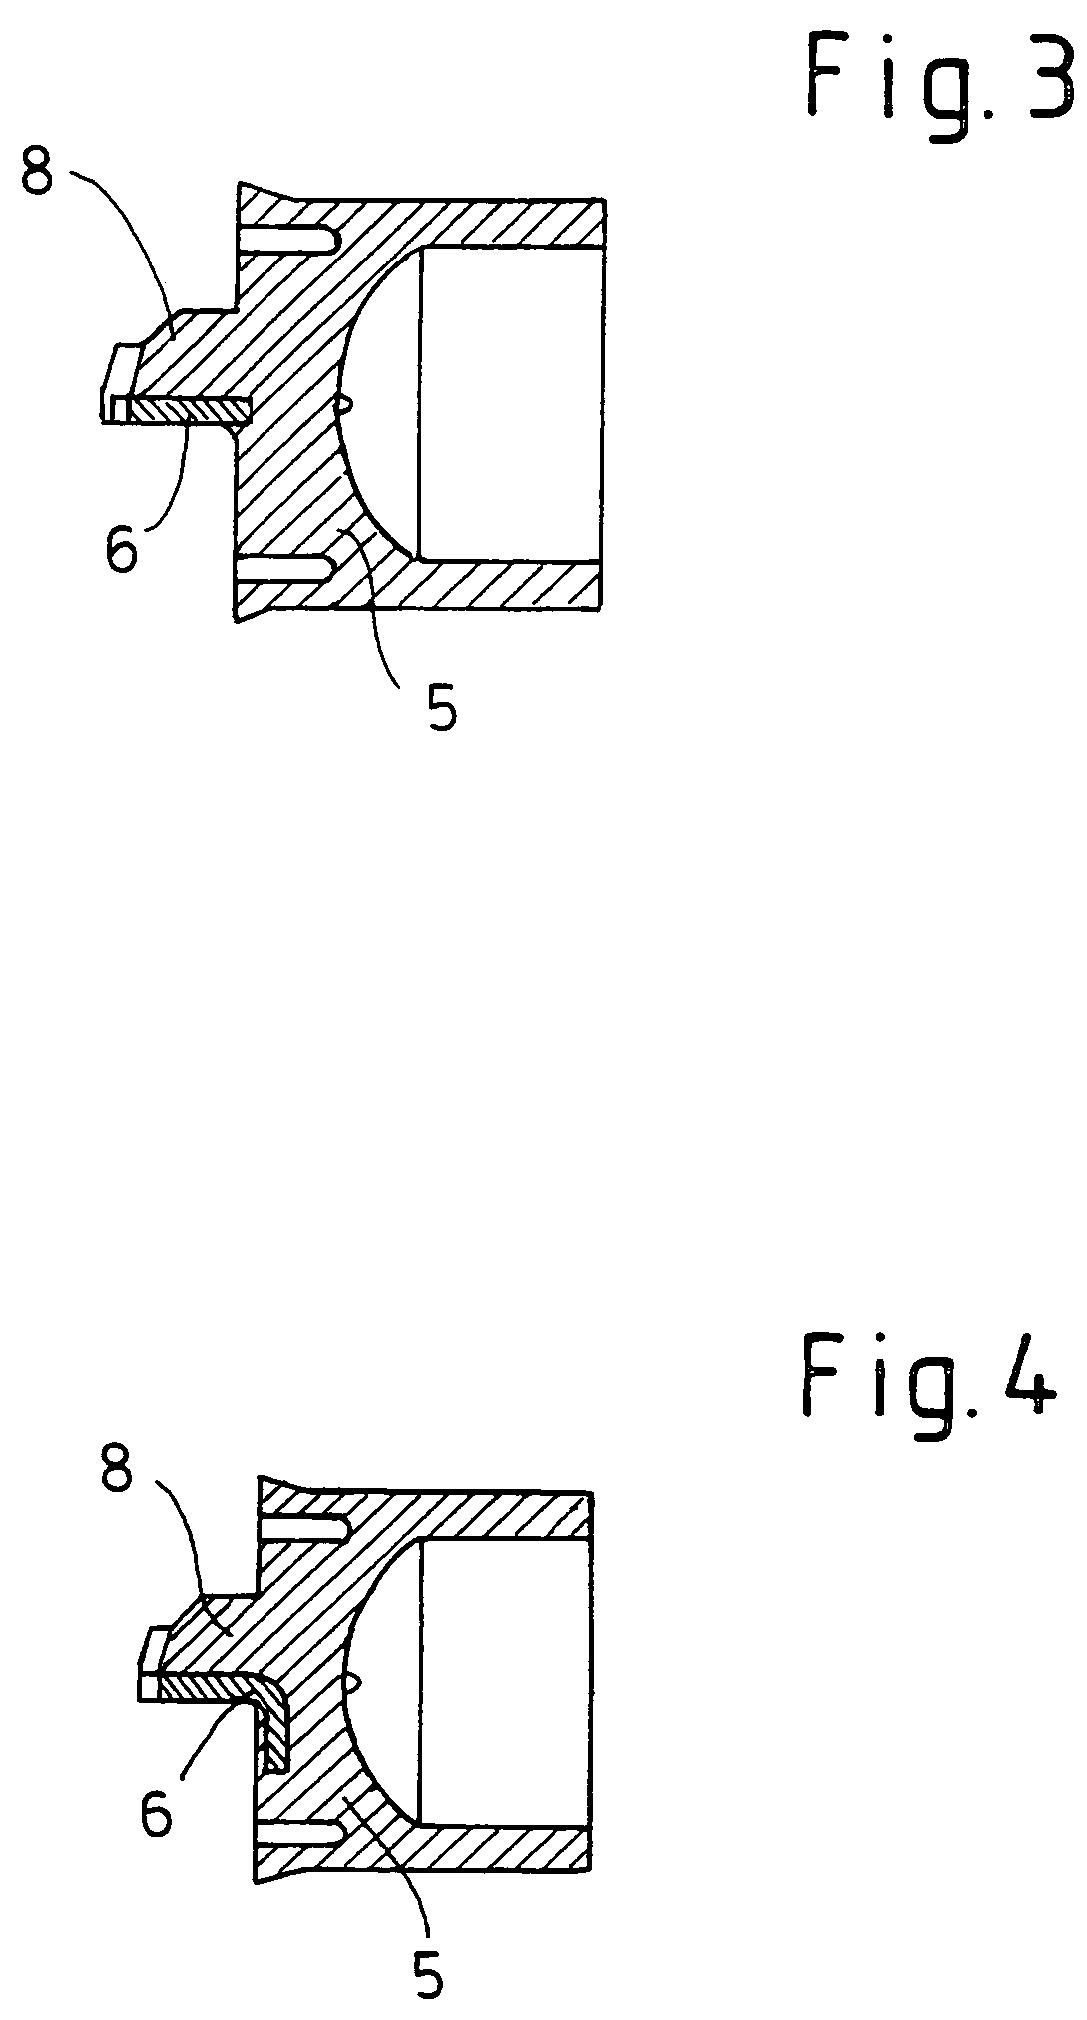 Chisel for a pyromechanical disconnecting device